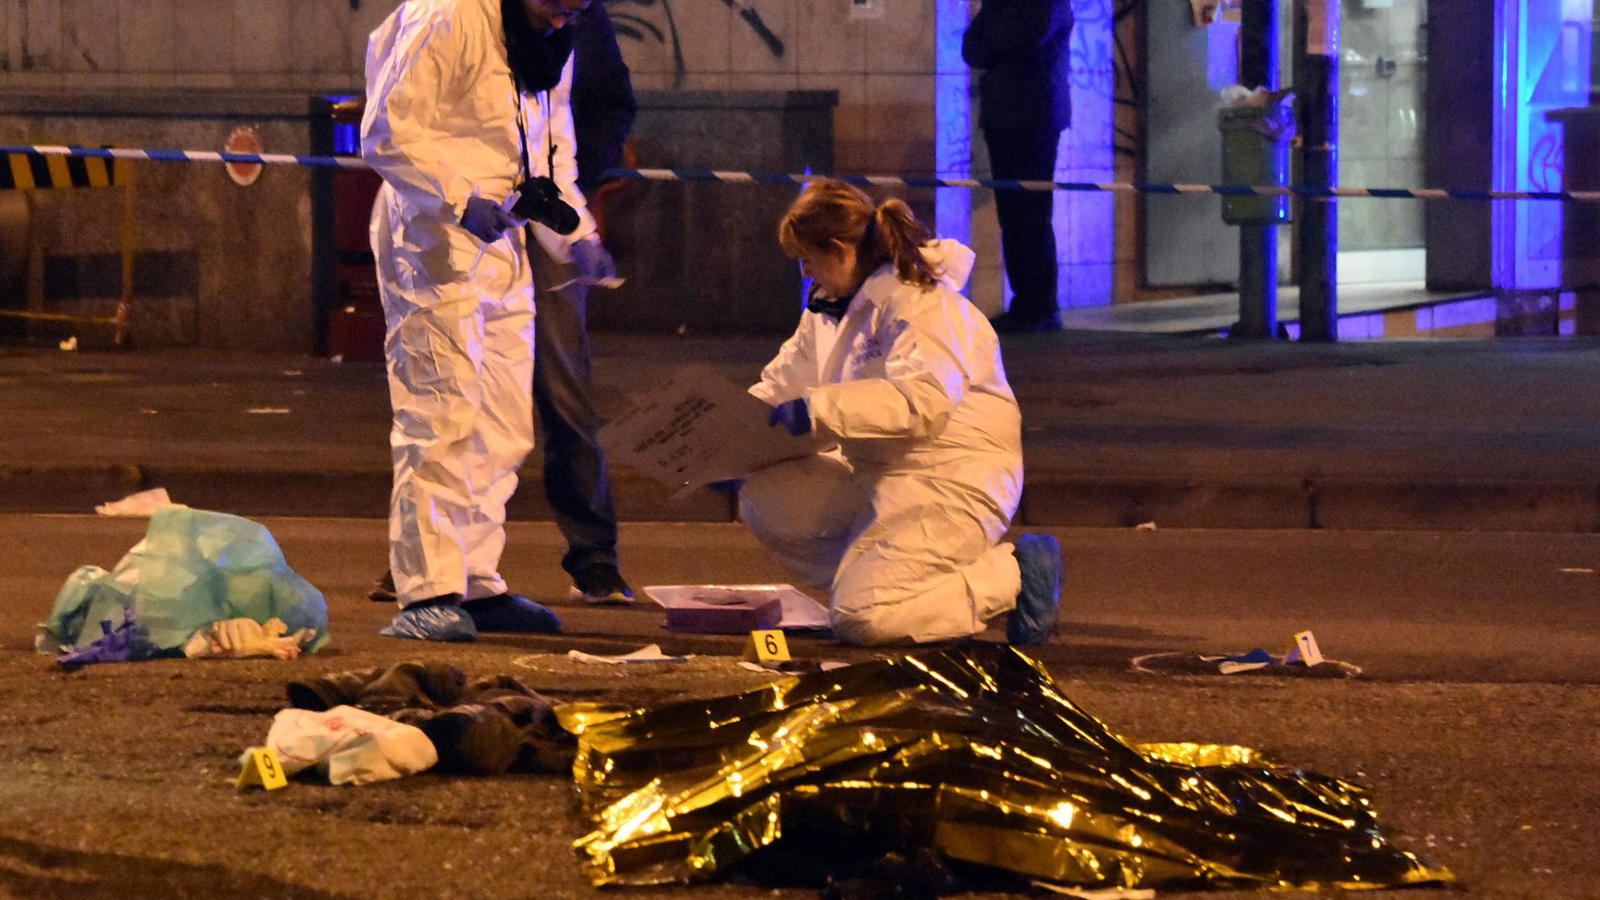 epa05688581 YEARENDER 2016 DECEMBER Italian forensic experts secure evidence next to a covered body at the scene of a shootout between police and a man in Milan's Sesto San Giovanni neighborhood, early 23 December 2016. Italy's Interior Minister Marc